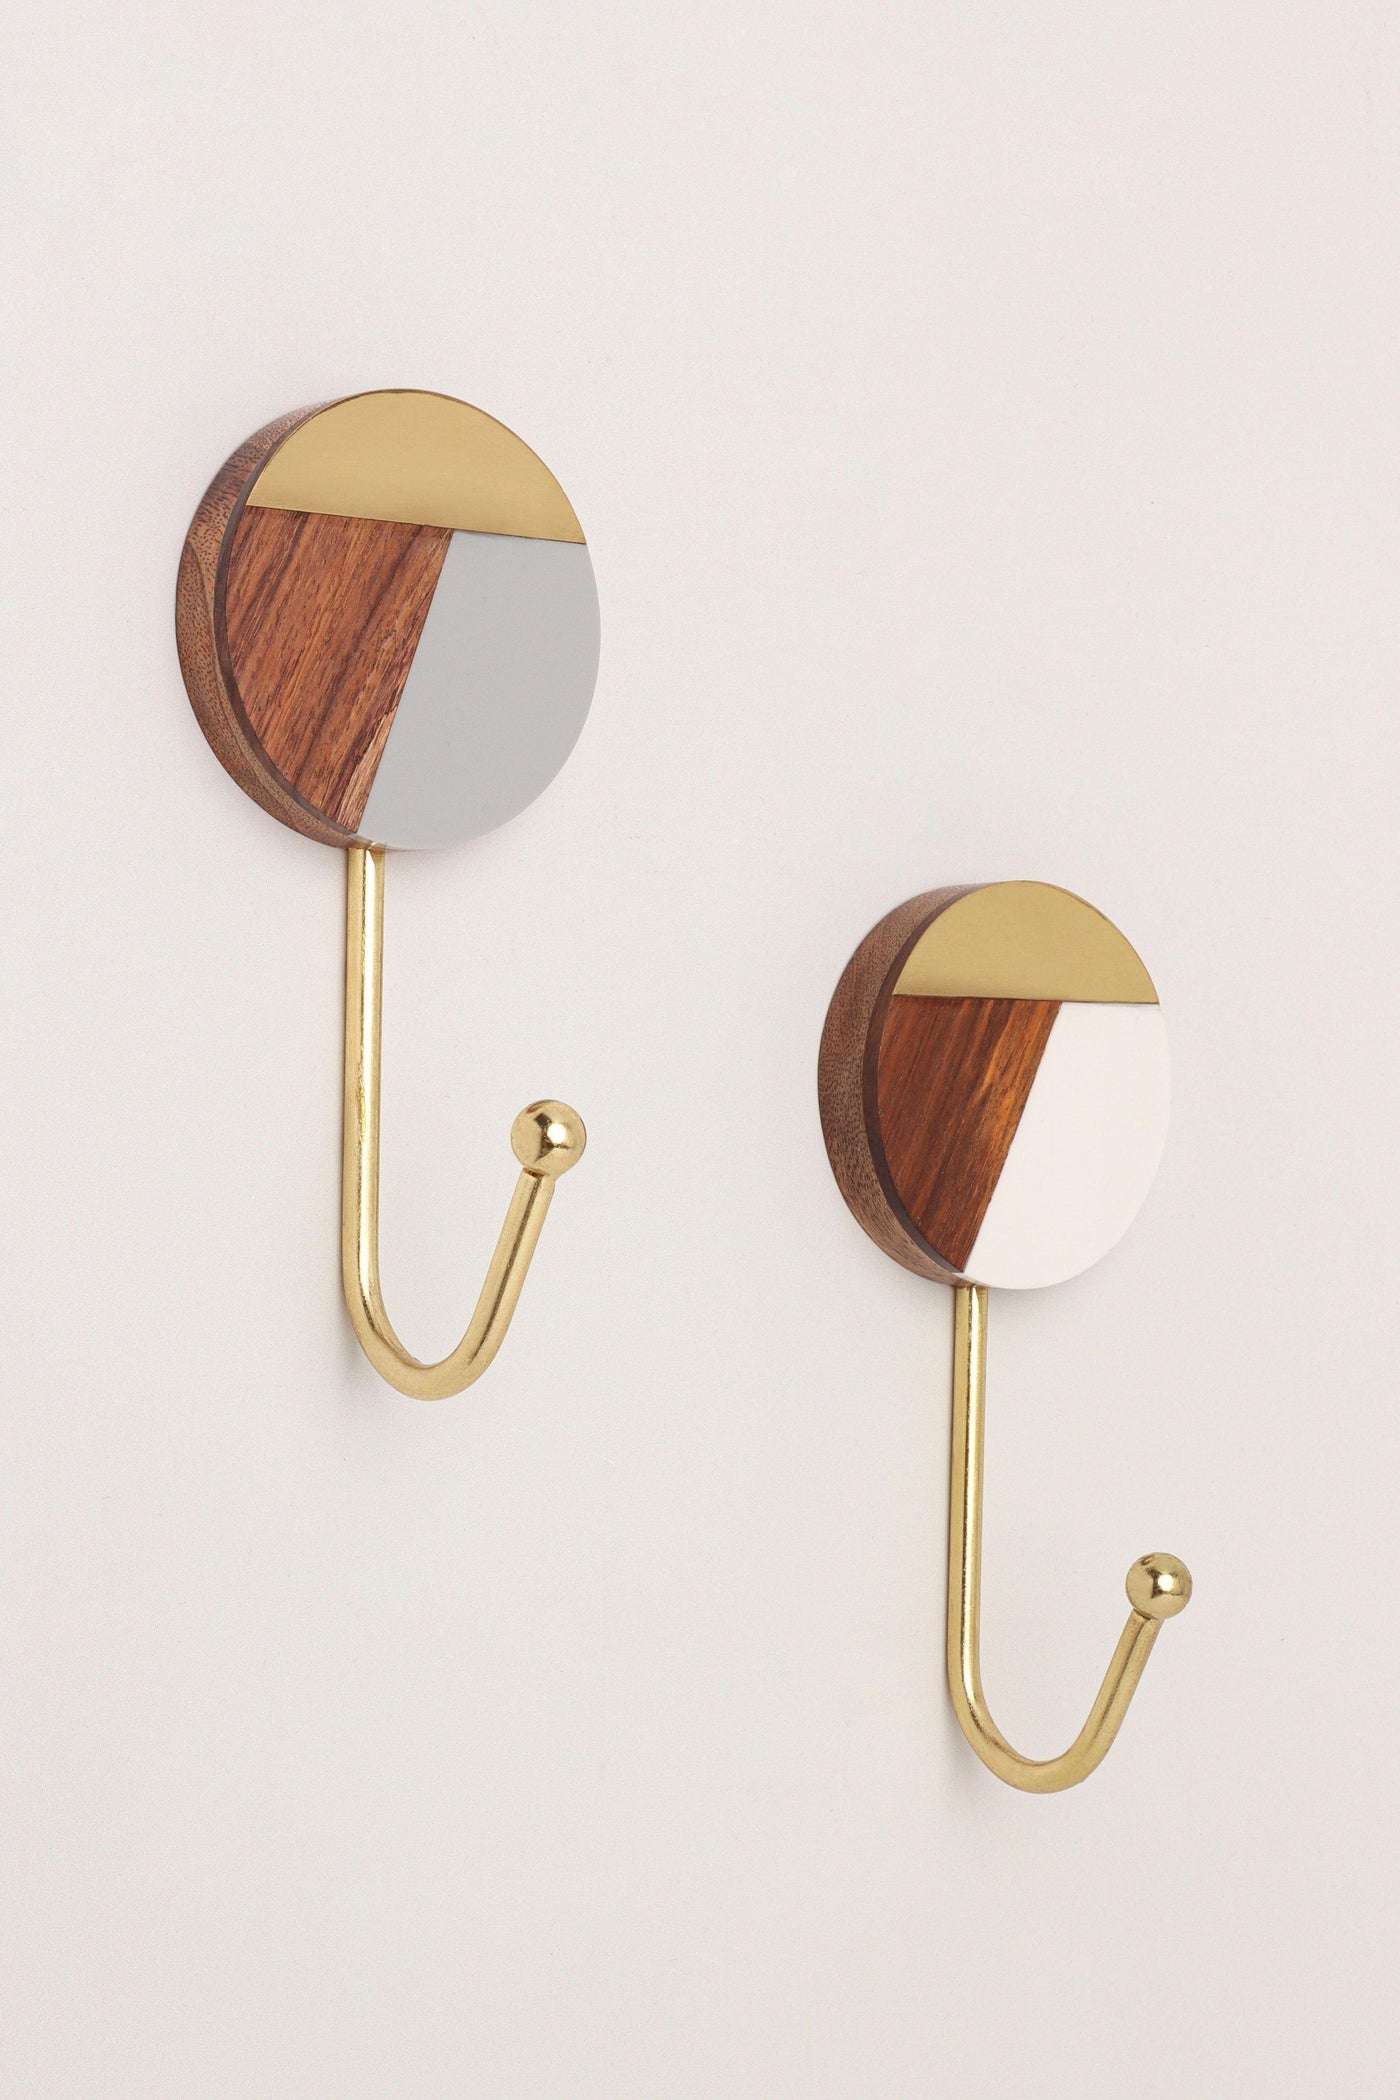 Gdecorstore Cabinet Knobs & Handles Three Tone Disk Wood Resin Brass Wall Coat Hooks